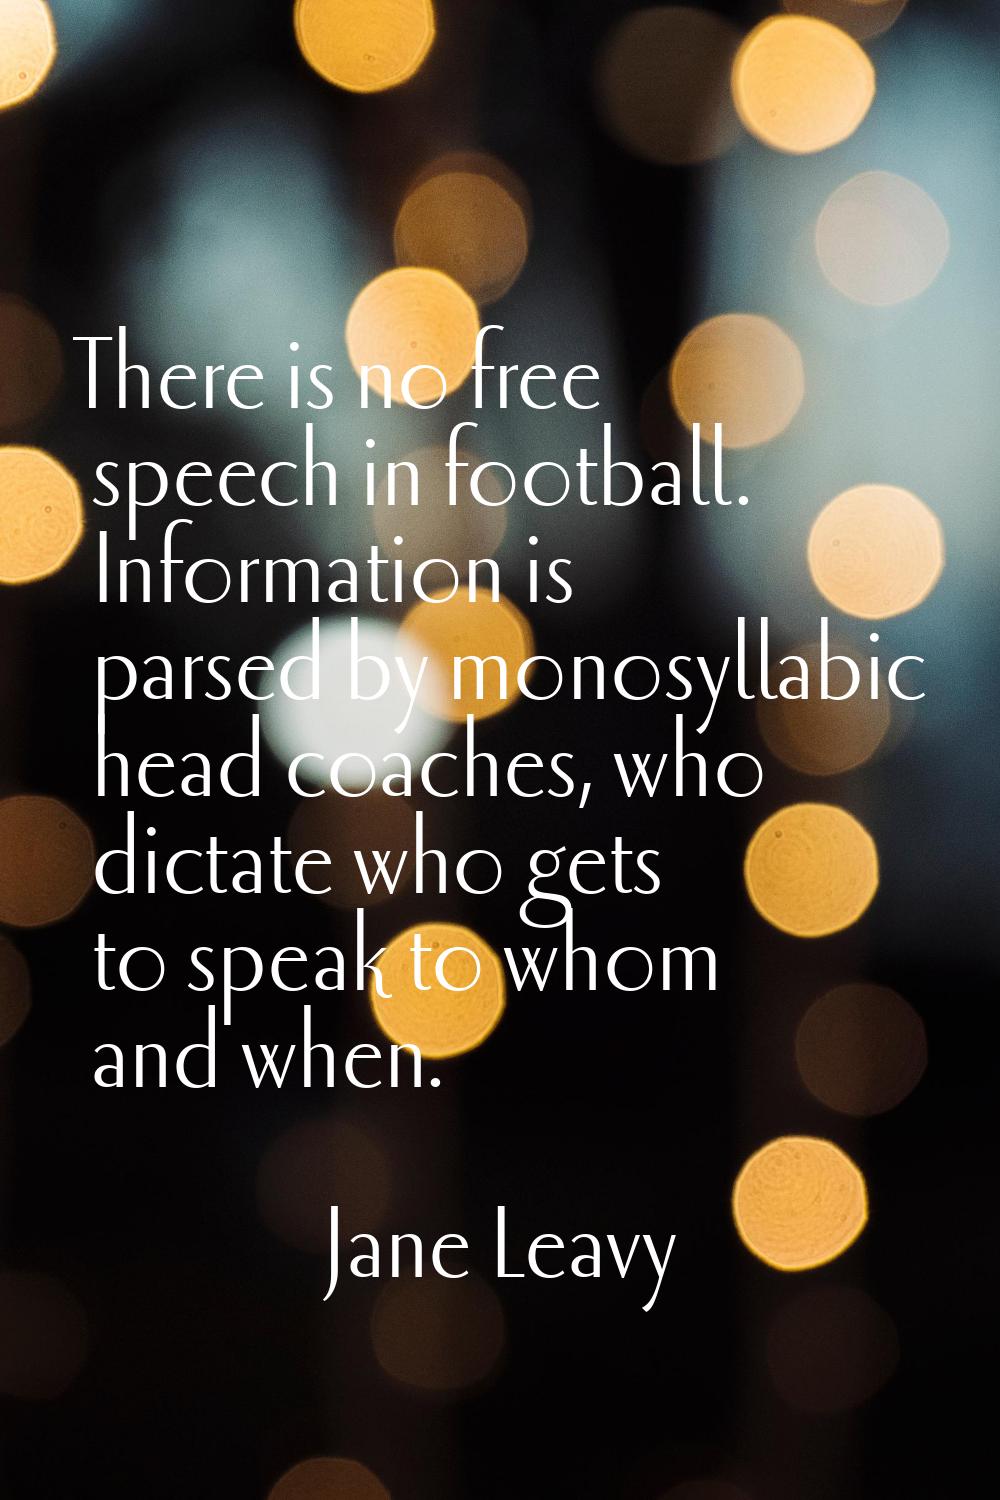 There is no free speech in football. Information is parsed by monosyllabic head coaches, who dictat